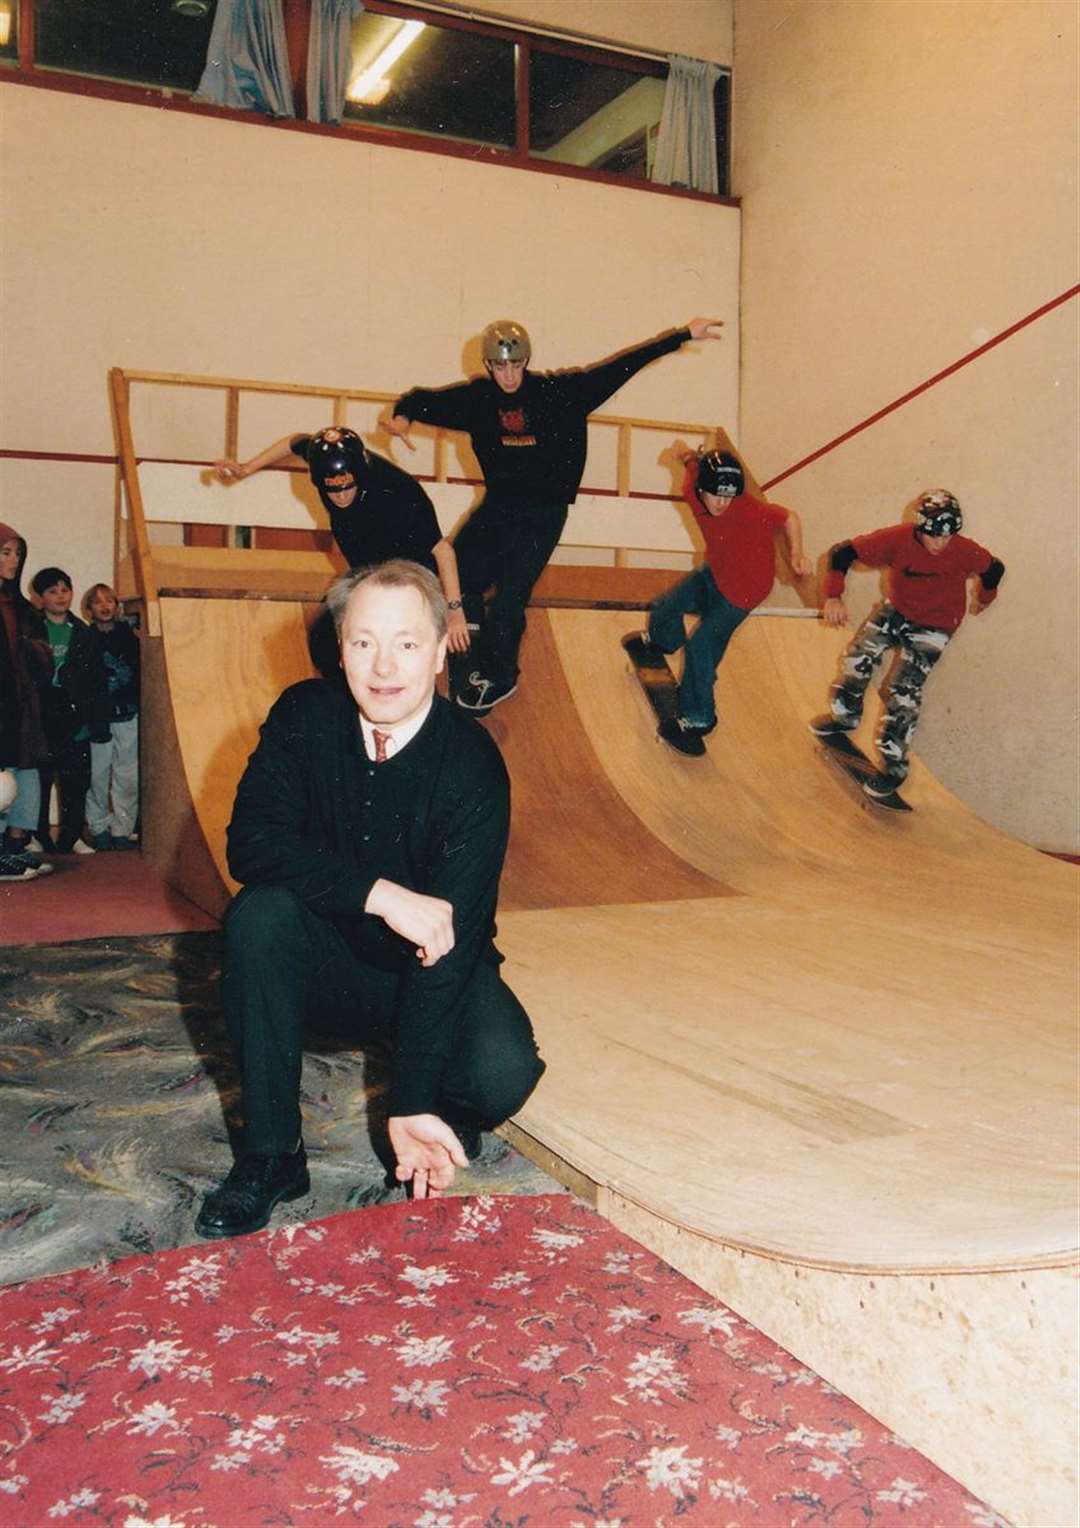 Dave Millar in the Centre squash court while it was used as a skateboard facility.